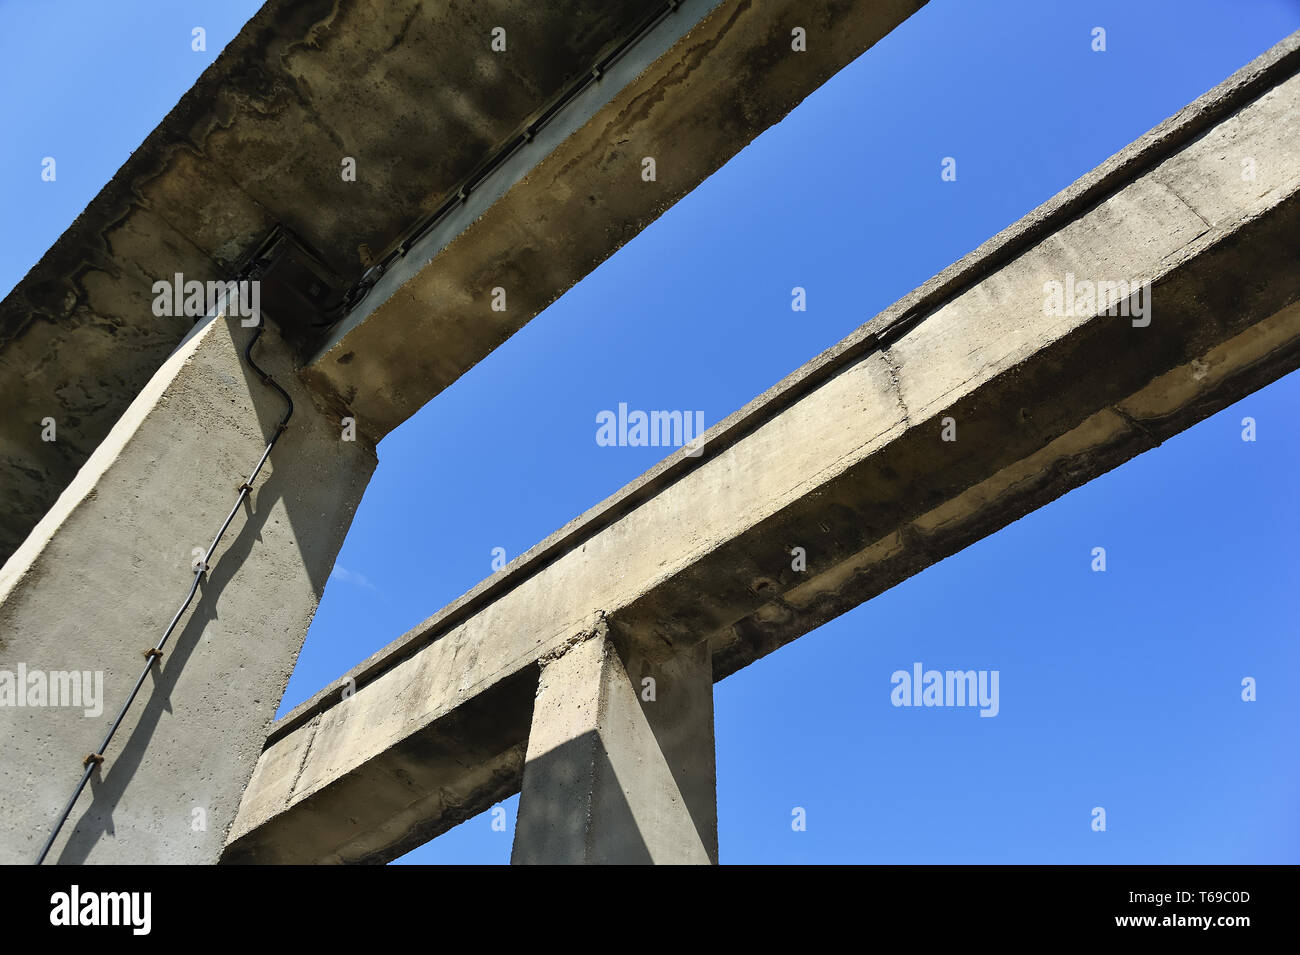 Two bridges rather dilapidated parts made of concrete Stock Photo